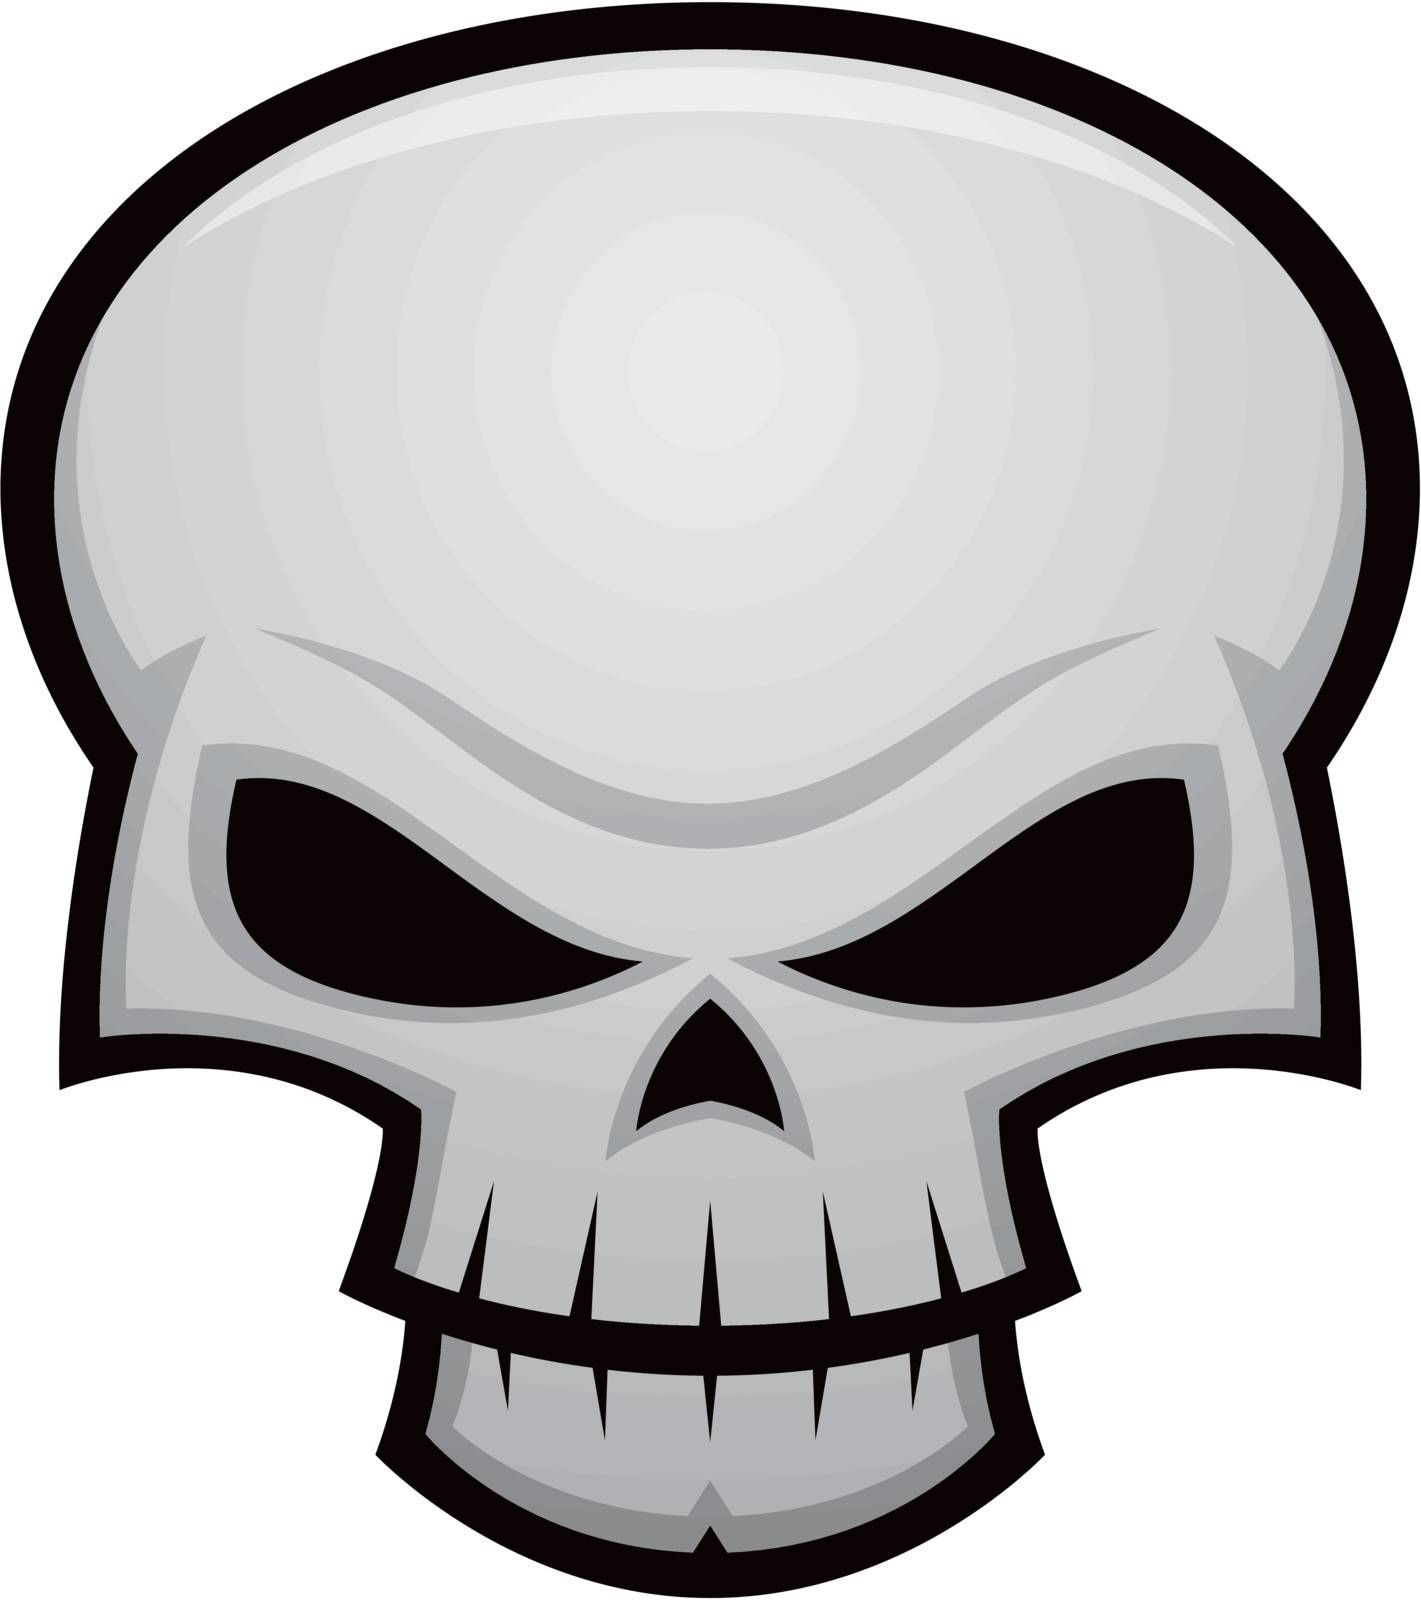 Cartoon vector illustration of an evil, stylized skull. Great for Halloween, pirate flags, warnings, etc.